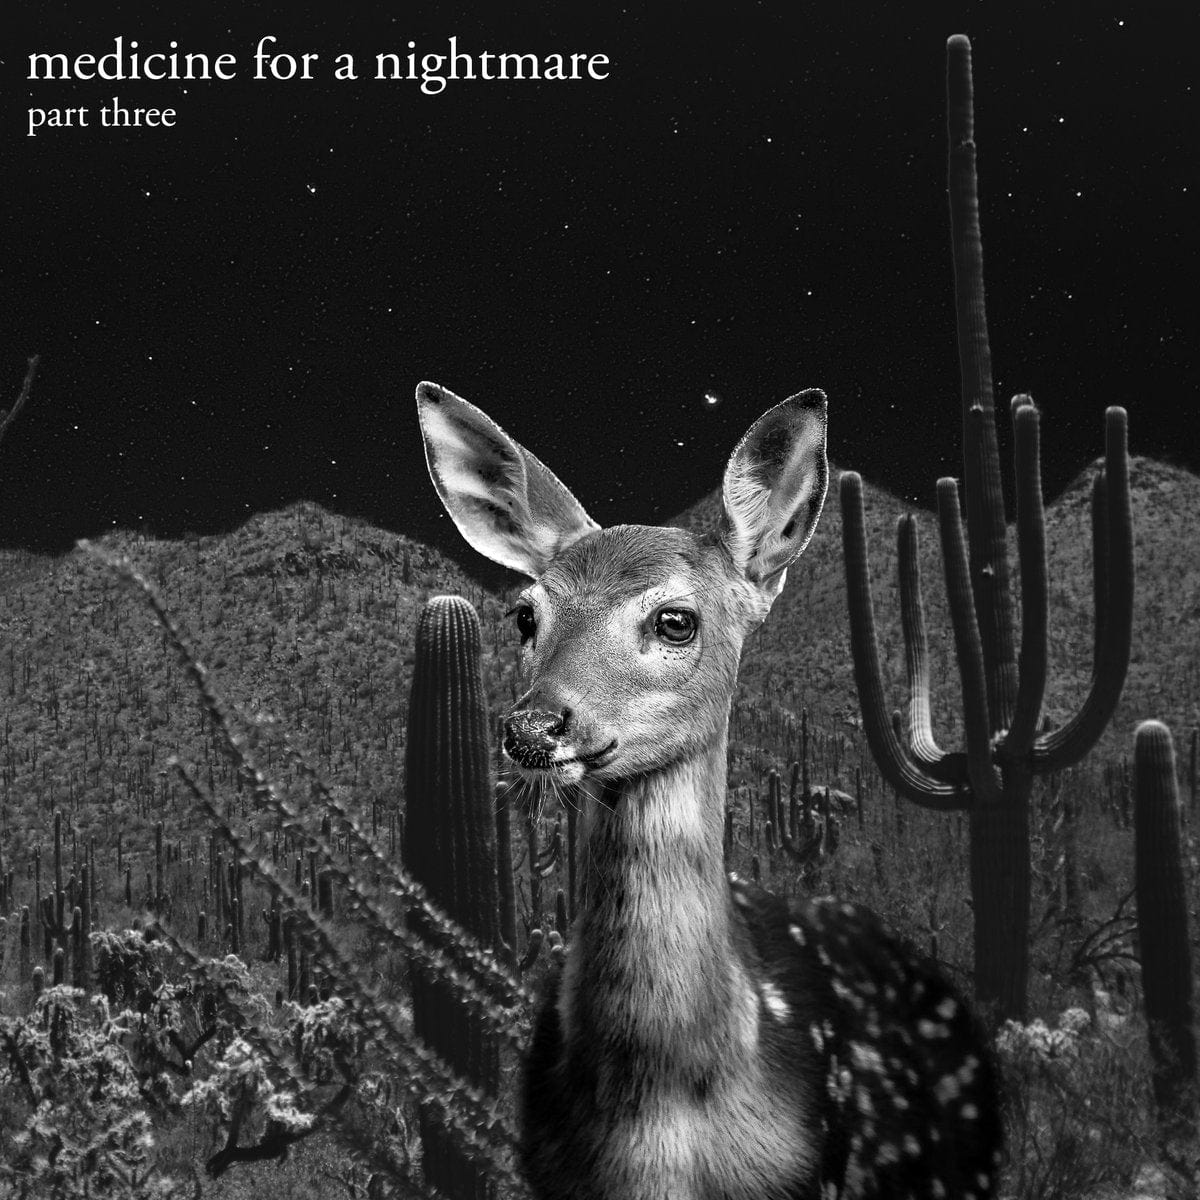 Medicine for a Nightmare Book &quot;Medicine for a Nightmare: Part Three&quot; Paperback